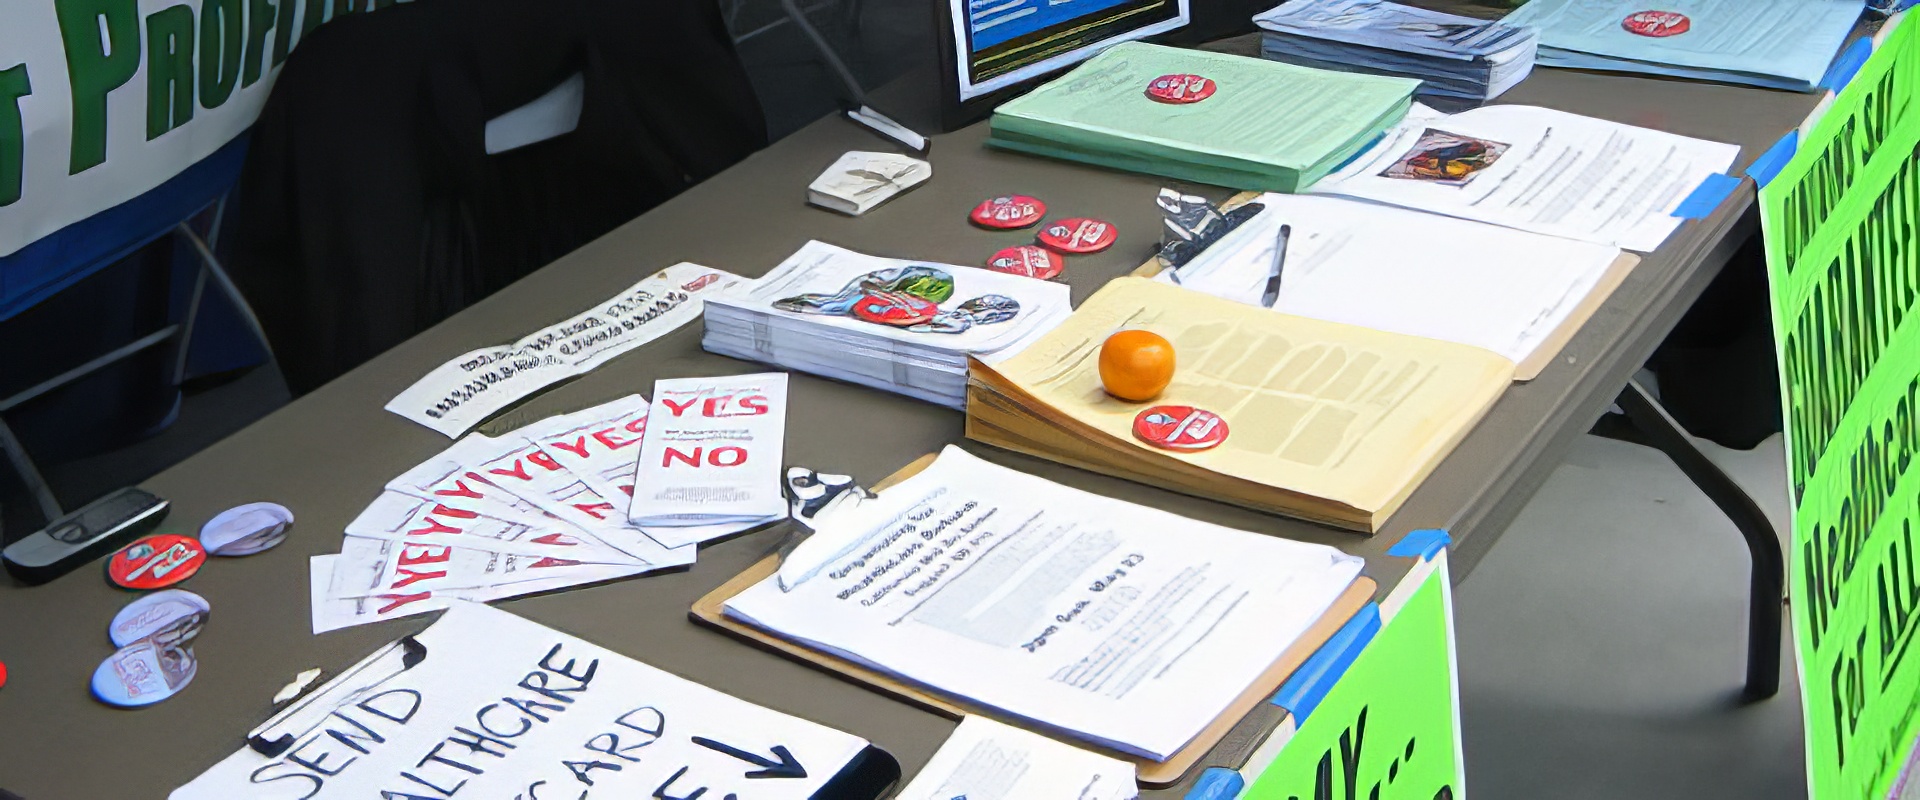 Single Payer Now information table with brochures and postcards